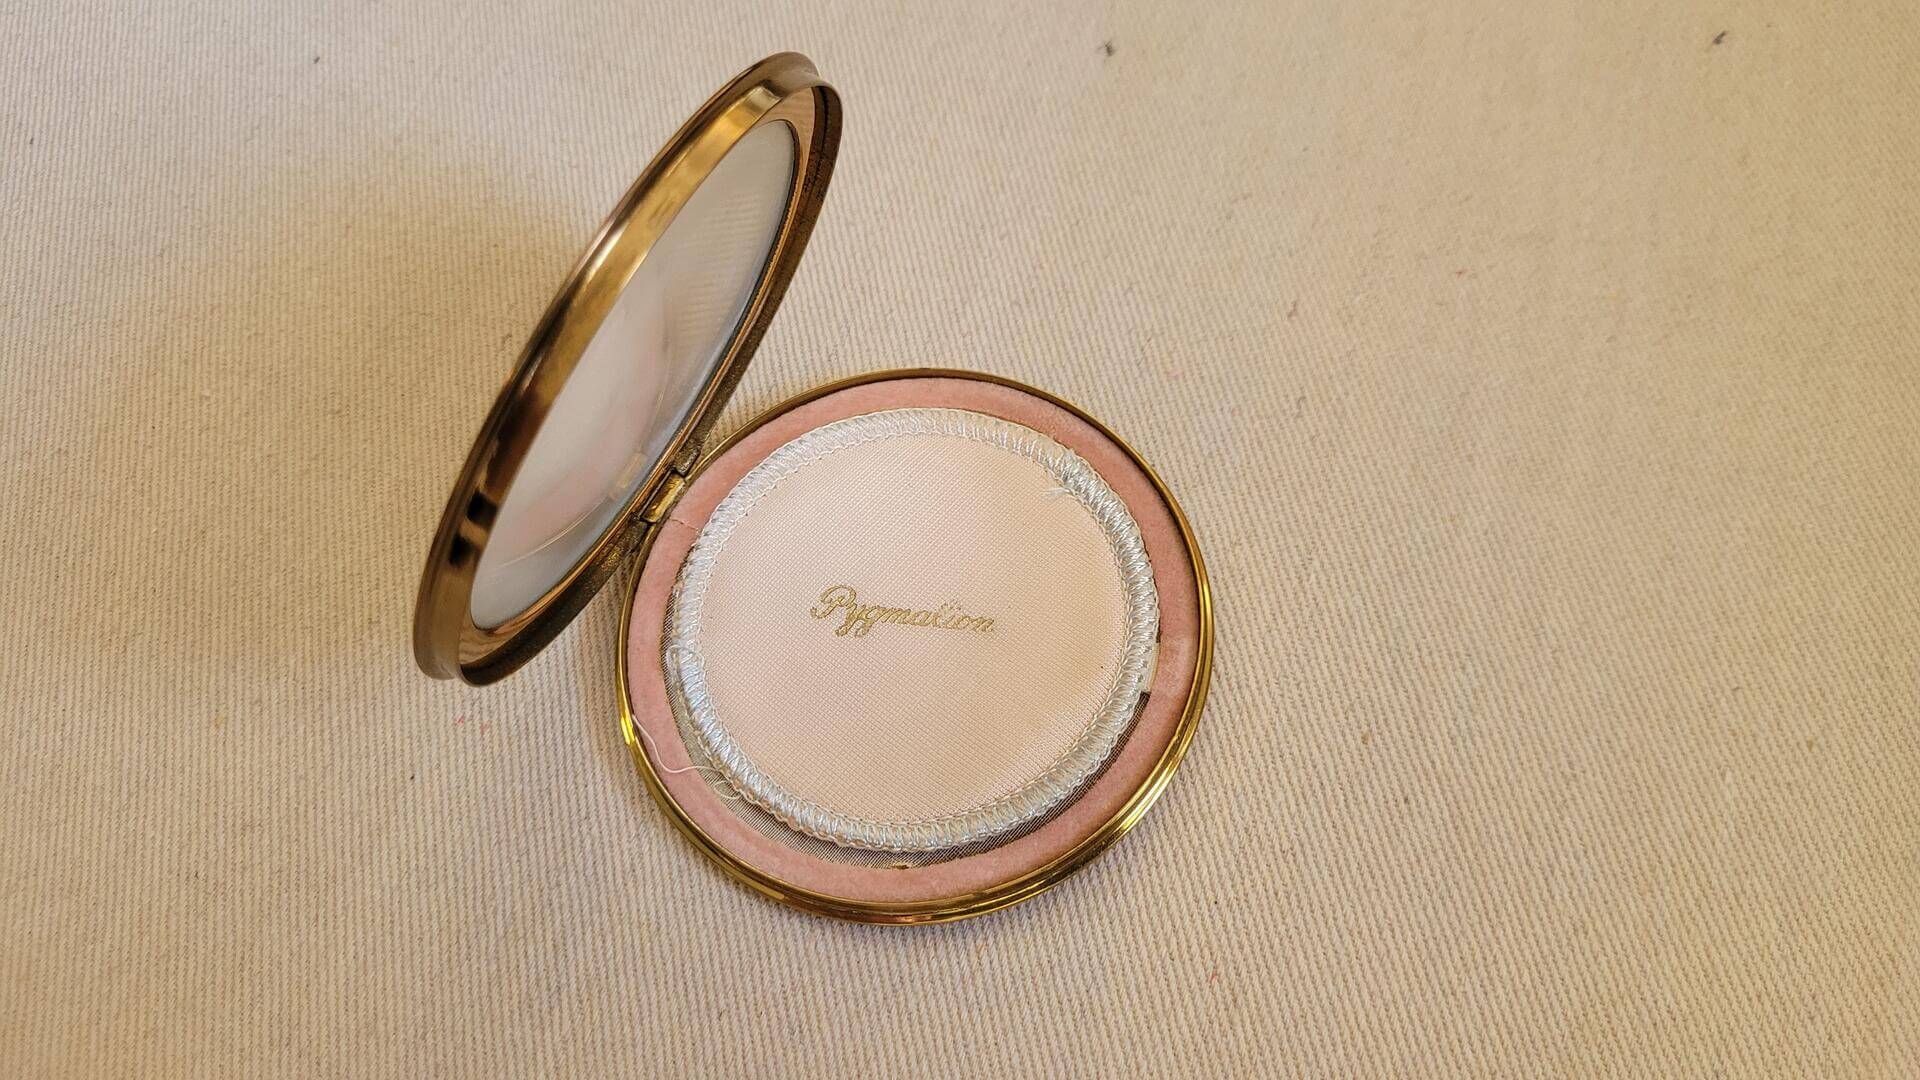 Vintage brass Pygmalion powder compact with the image of Queen Elizabeth II wearing the crown. Rare made in England compact and mid century MCM vanity cosmetics collectible